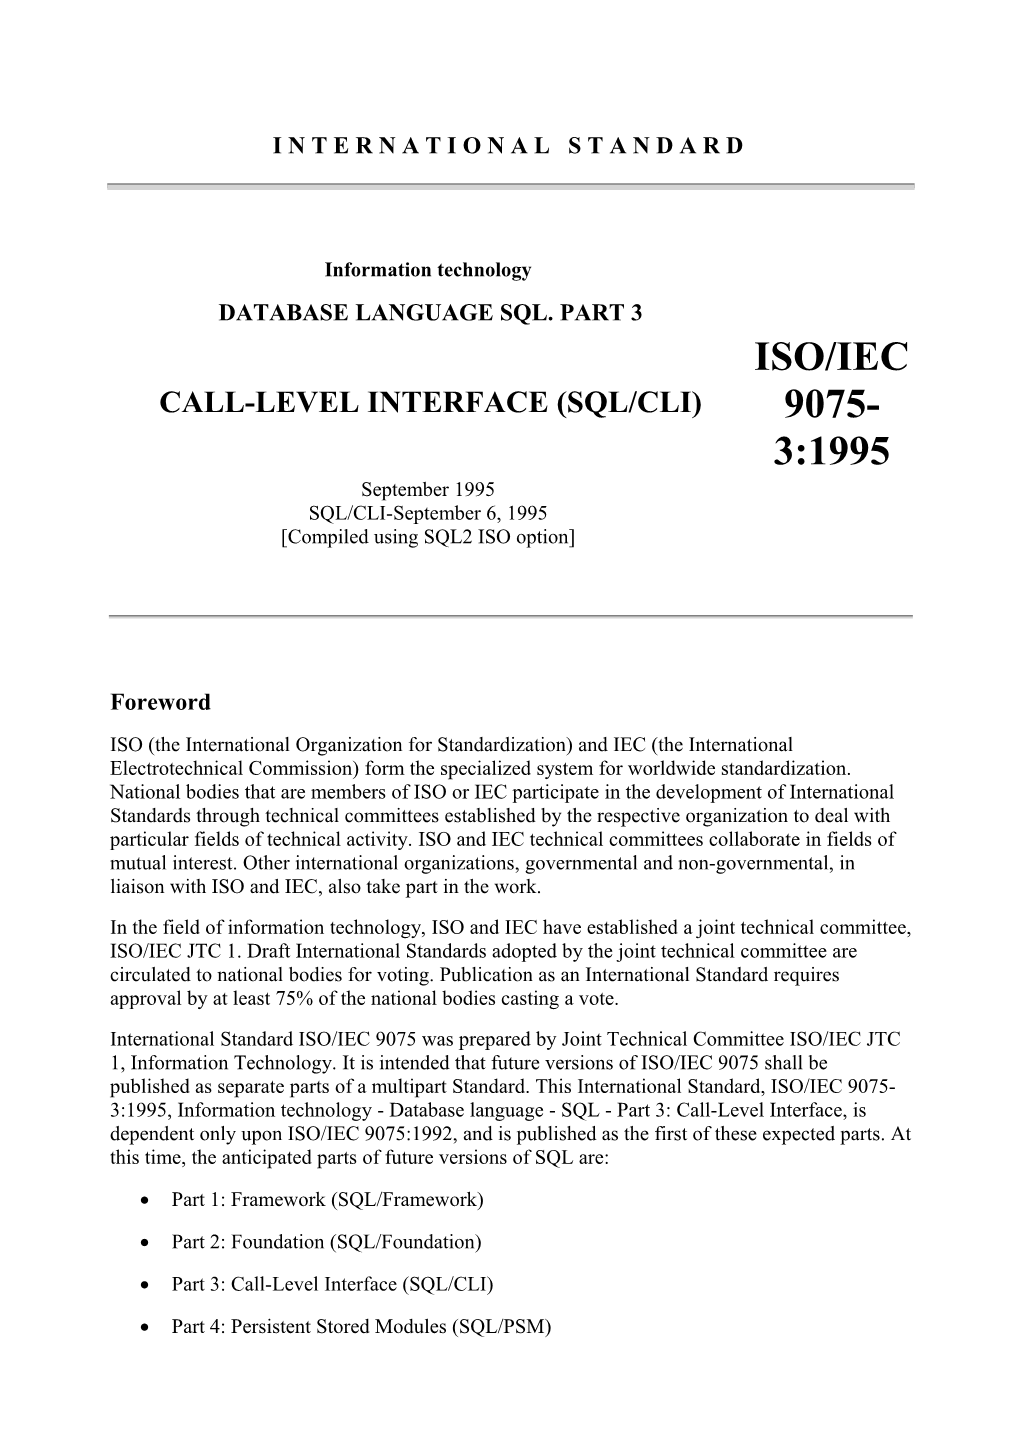 ISO/IEC 9075-3:1995. Call-Level Interface (SQL/CLI)